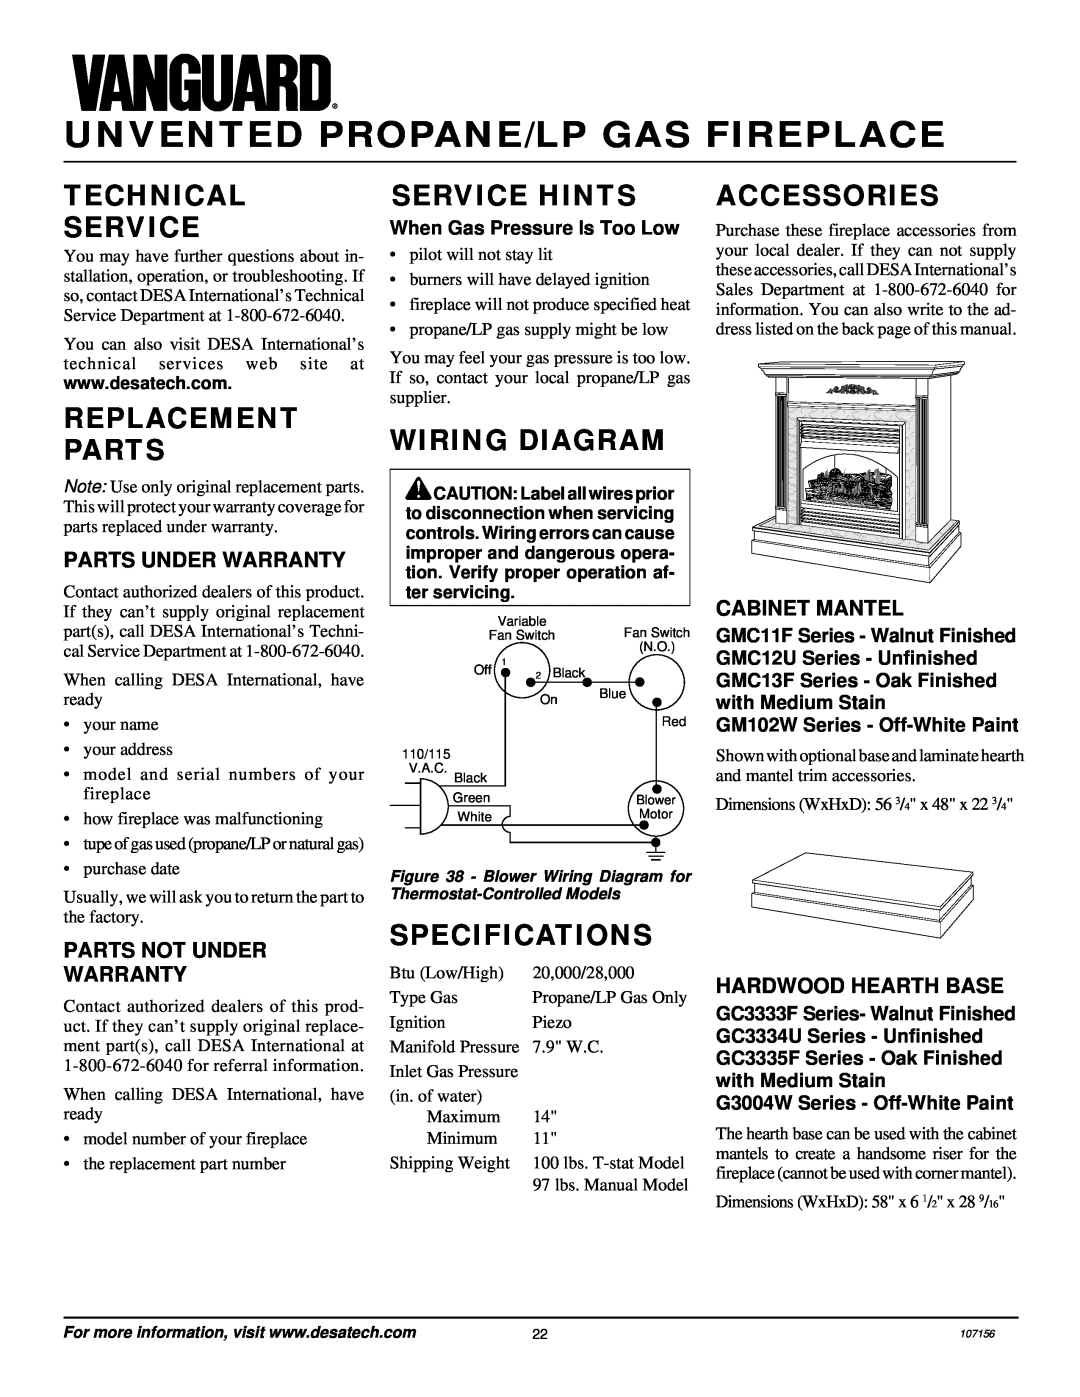 Vanguard Heating VSGF28PTC, VSGF28PVA Technical Service, Replacement Parts, Service Hints, Wiring Diagram, Specifications 